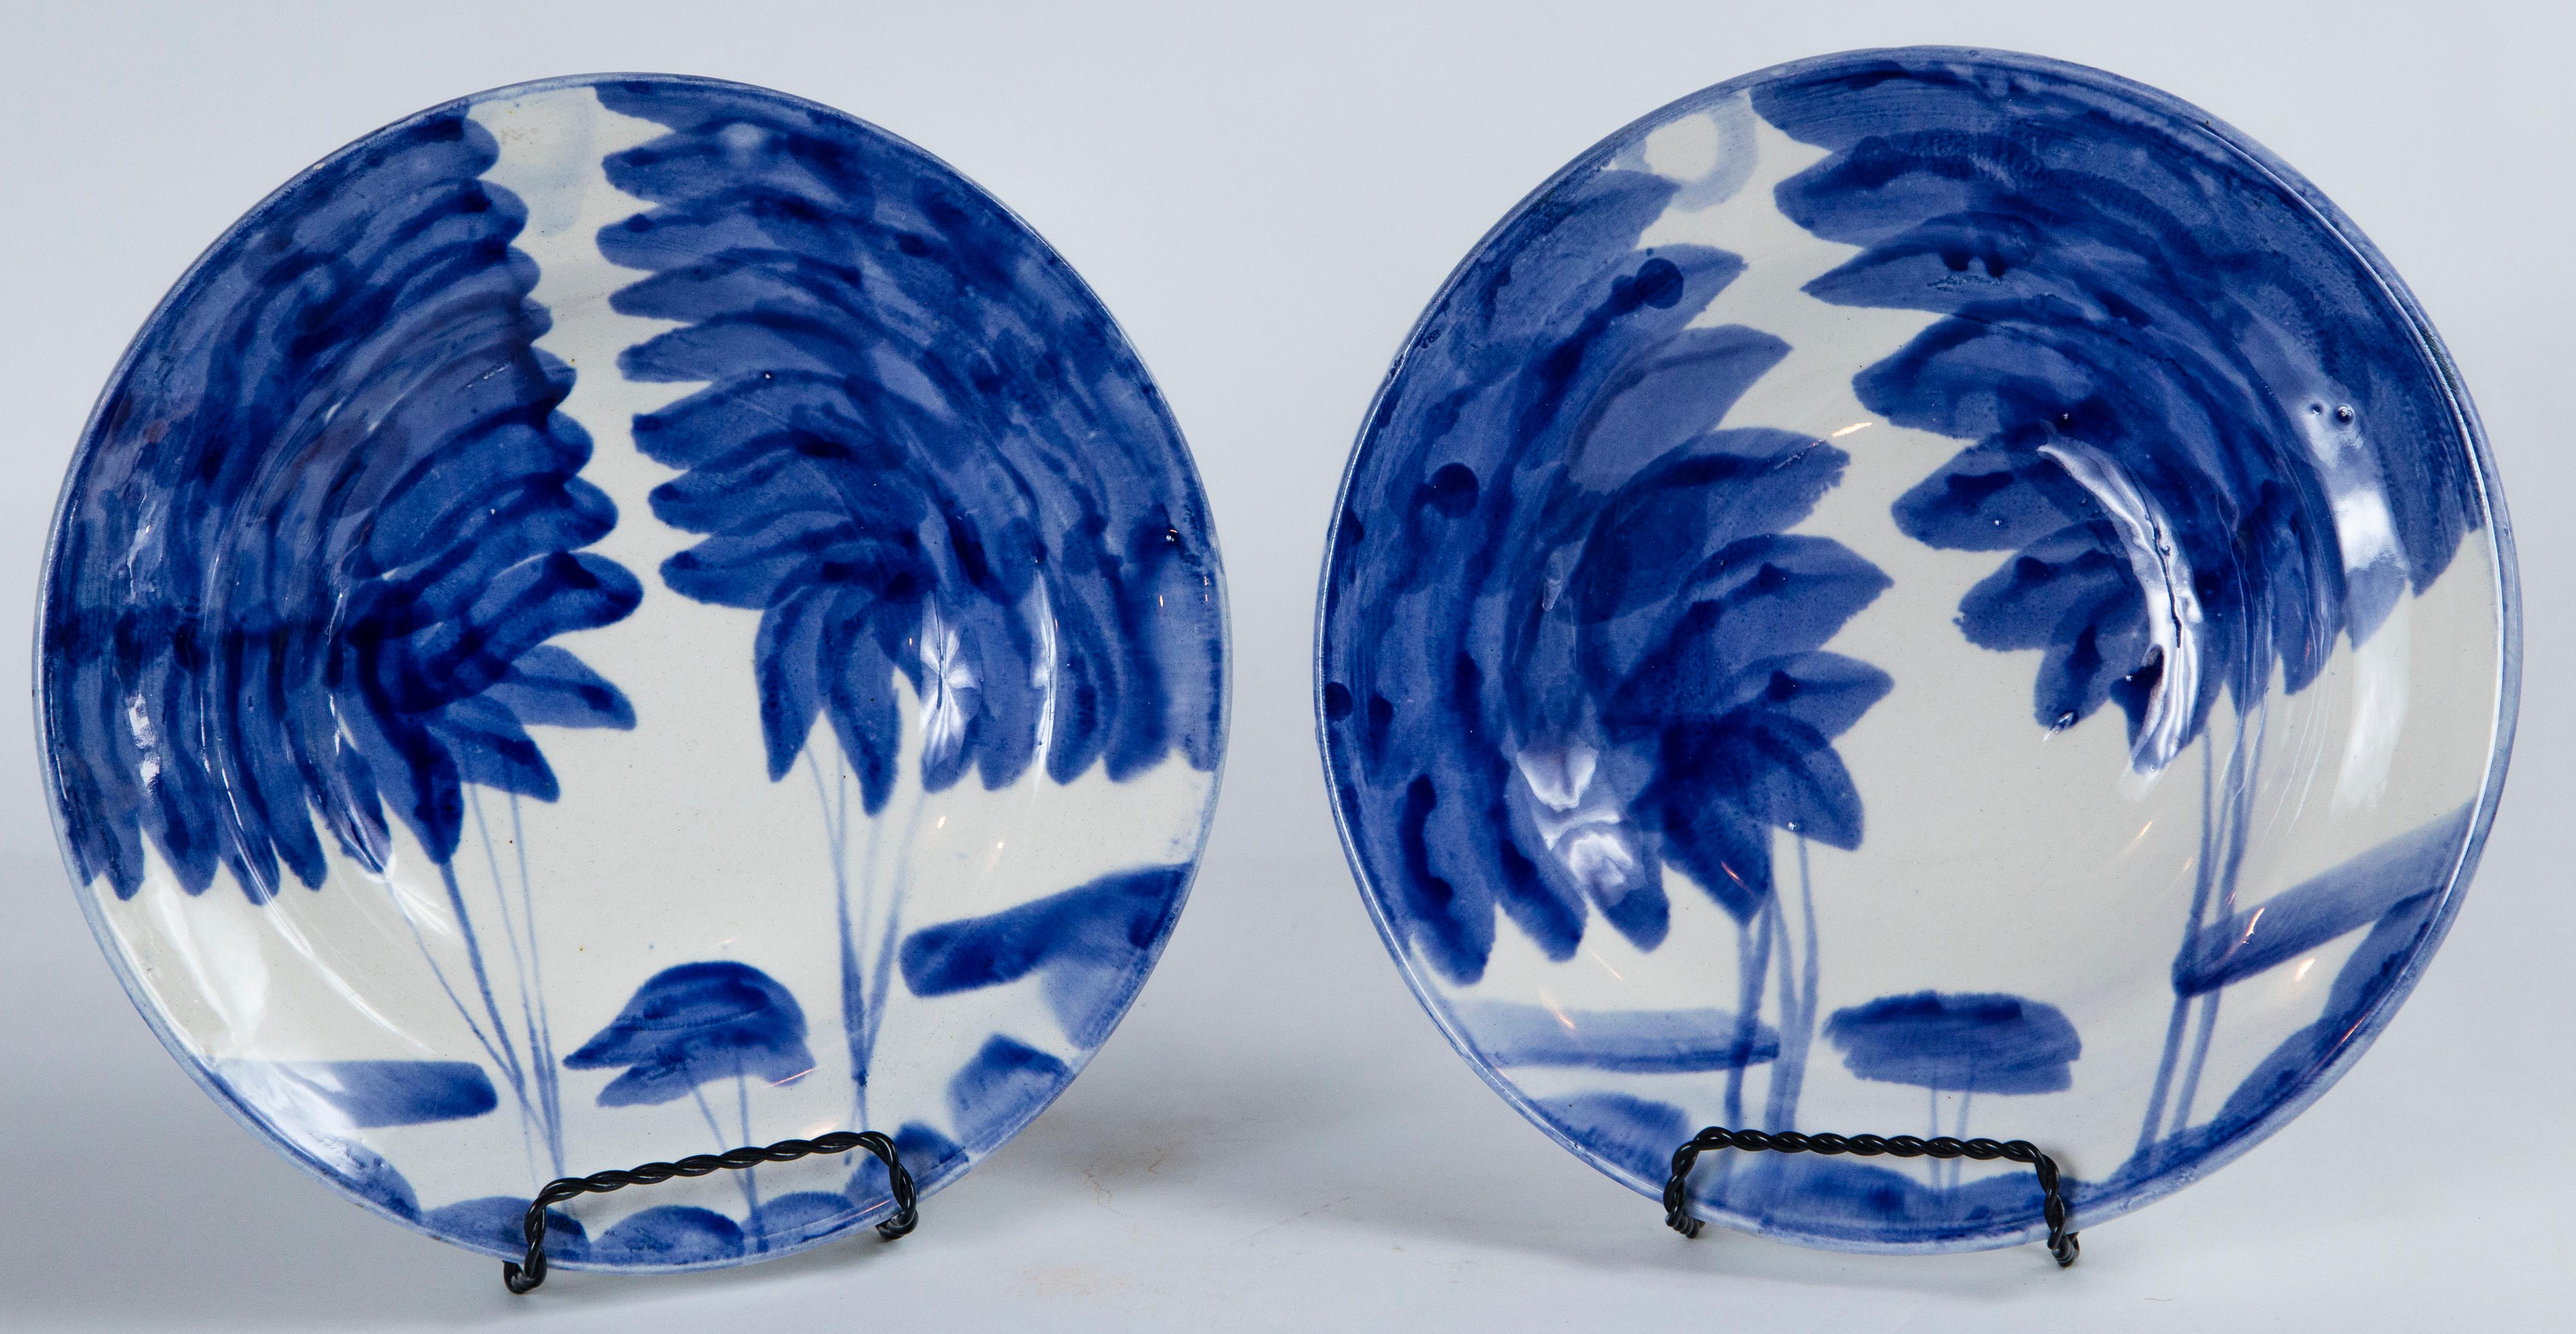 European Pair of Hand Painted Blue and White Ceramic Bowls, Europe, Mid-20th Century